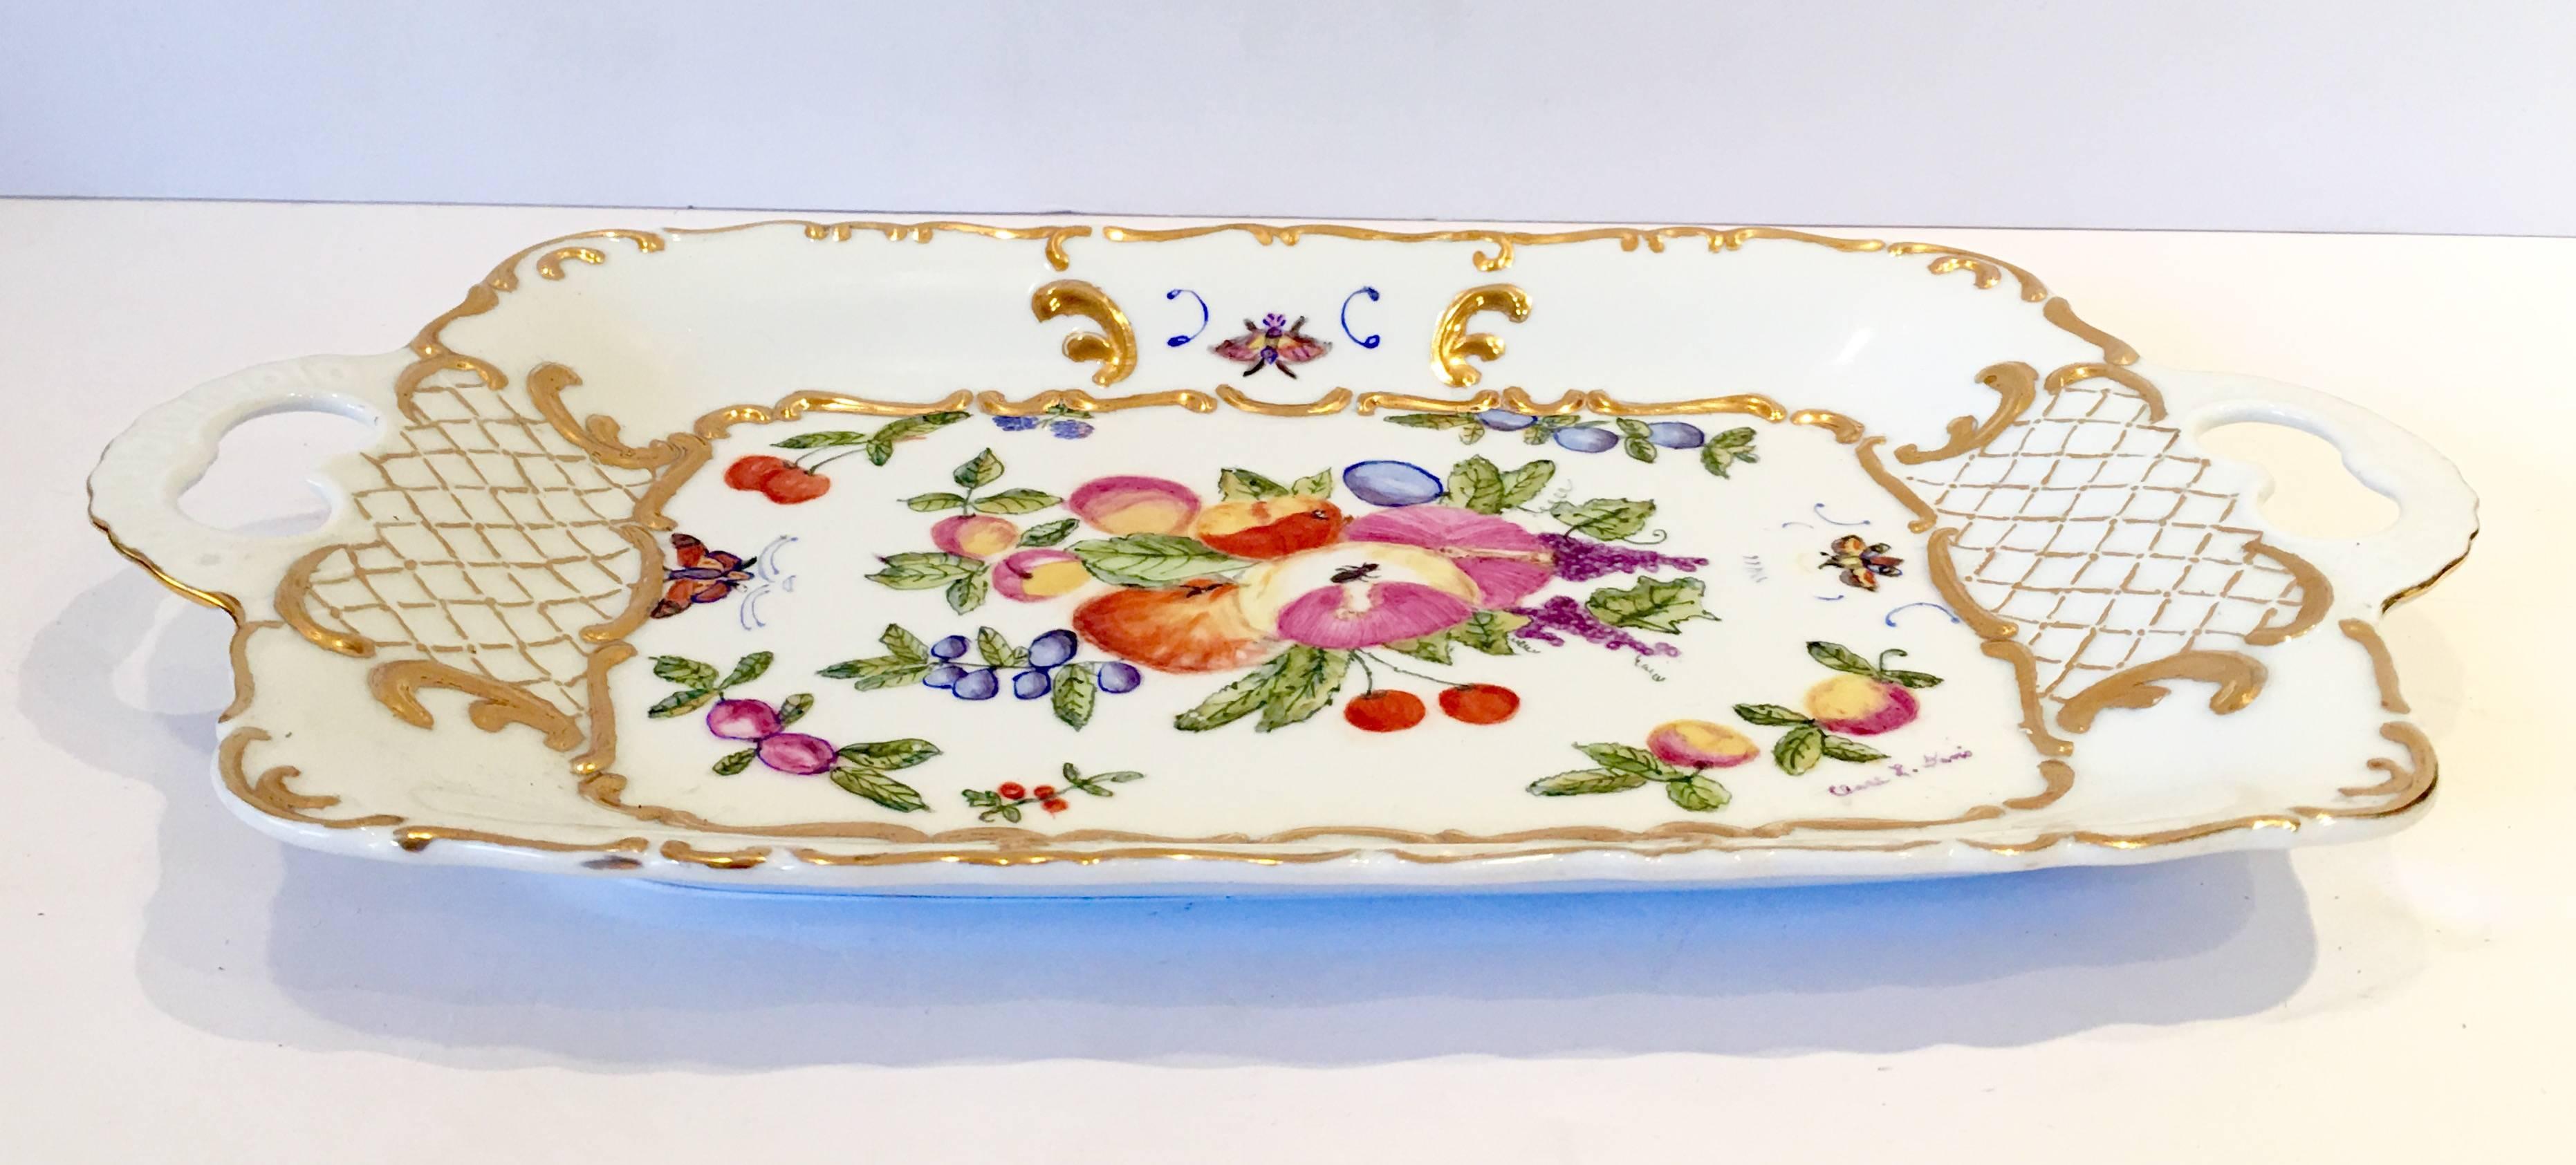 Bavaria West Germany bright white hand-painted with 22-karat raised gold lattice detail fruit and butterfly motif two handles rectangular tray/paltter. Artist signed lower right as manufacturers mark on the underside, Gerold Porzellan Bavaria West